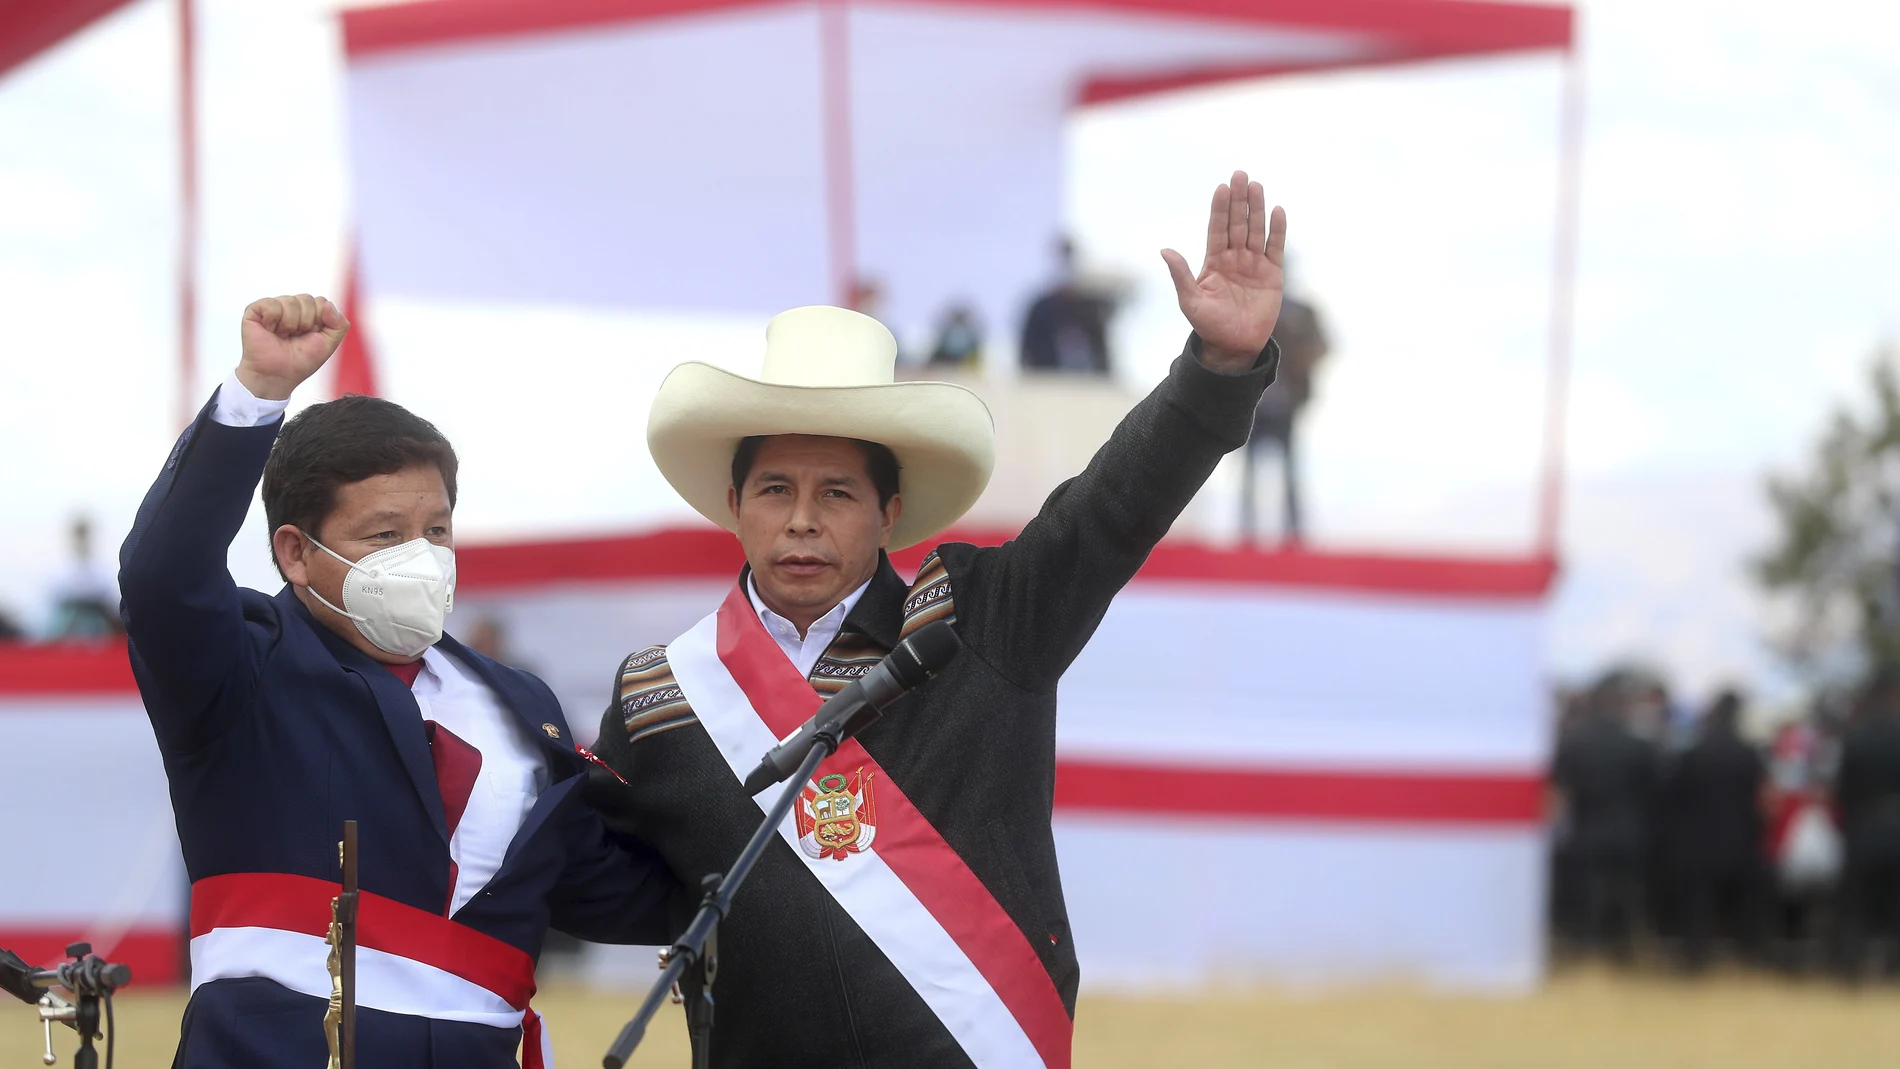 Peru's President Pedro Castillo, right, and his Prime Minister Guido Bellido pose for photos after a symbolic swearing-in ceremony at the site of the 1824 Battle of Ayacucho, which sealed independence from Spain, at the Pampa de la Quinua as part of PeruÂ´s bicentennial celebrations in Ayacucho, Peru, Thursday, July 29, 2021, the day after he was officially sworn in as president. (AP Photo/Ernesto Arias)